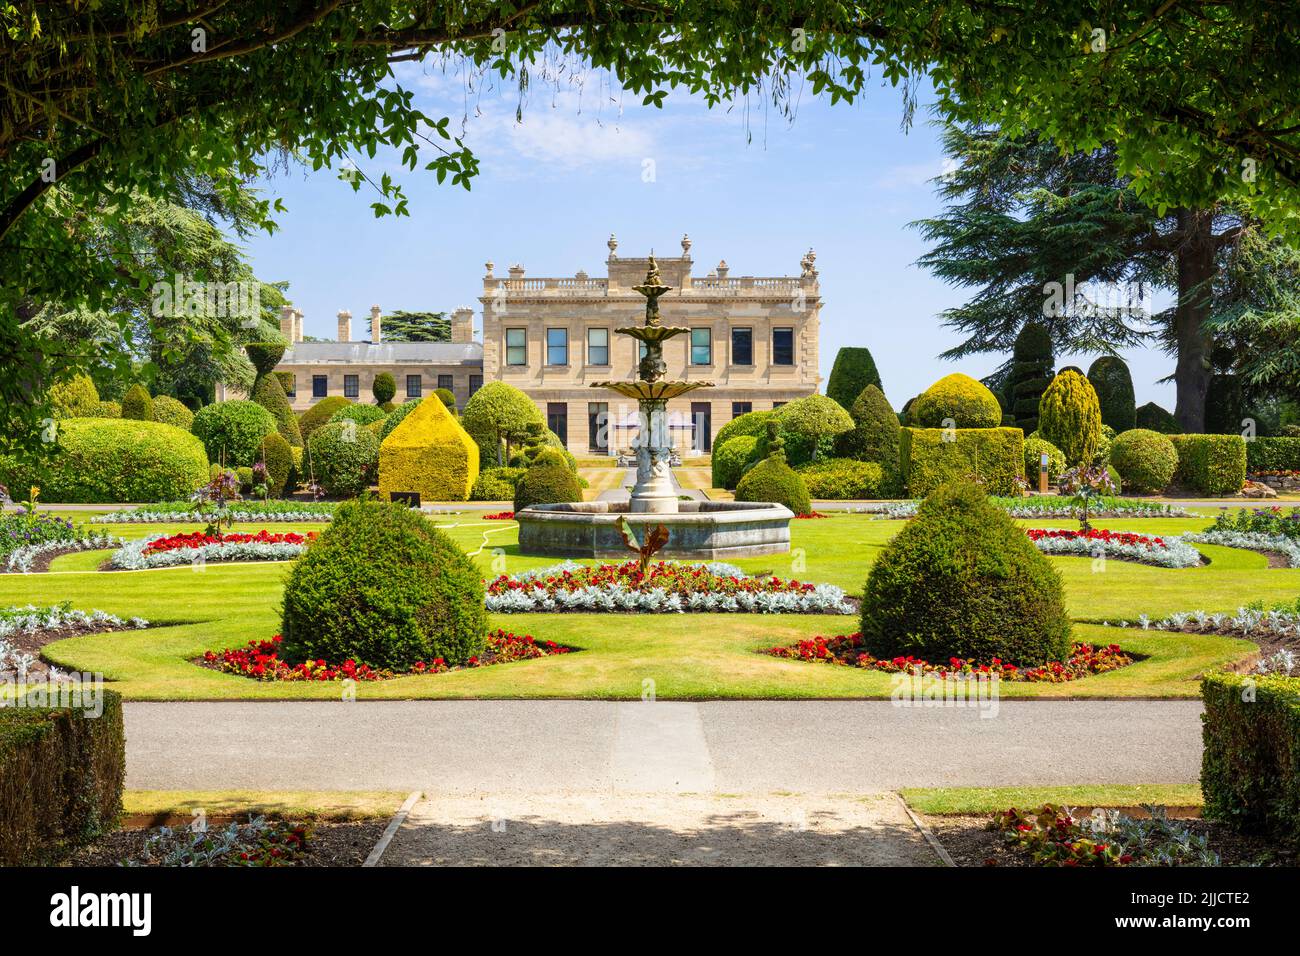 Brodsworth hall and gardens a Victorian country house with Formal gardens and fountain at Brodsworth Hall near Doncaster South Yorkshire England uk gb Stock Photo